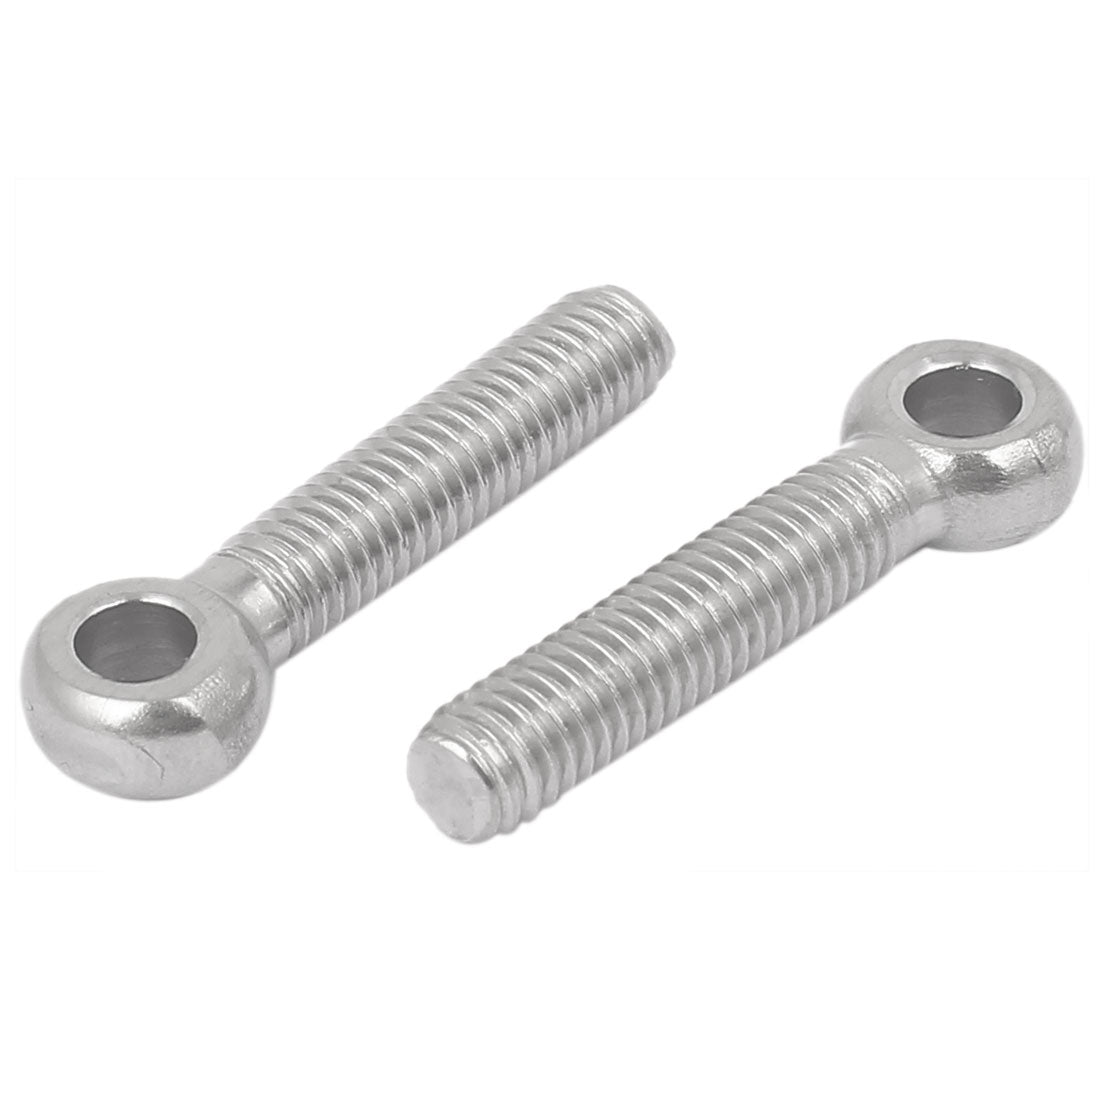 uxcell Uxcell M6 x 30mm 304 Stainless Steel Machine Shoulder Lift Eye Bolt Rigging 30pcs